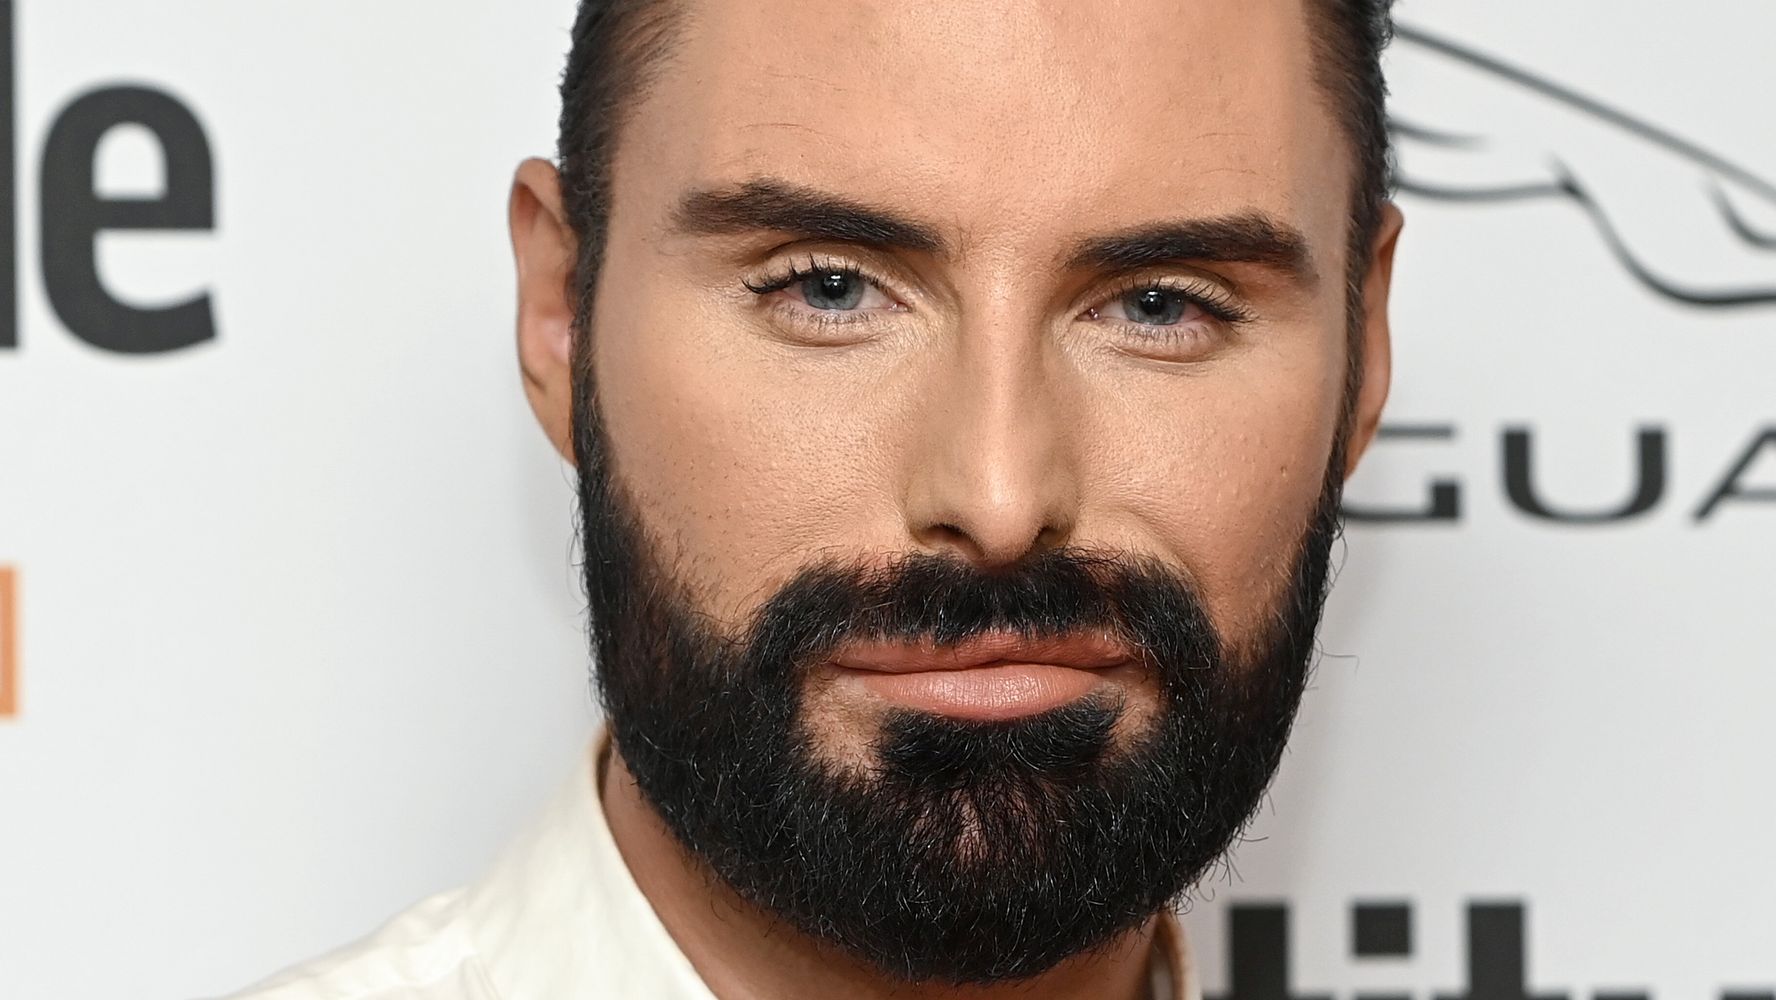 Rylan Clark reveals he was hospitalized after suffering from a divorce with his husband